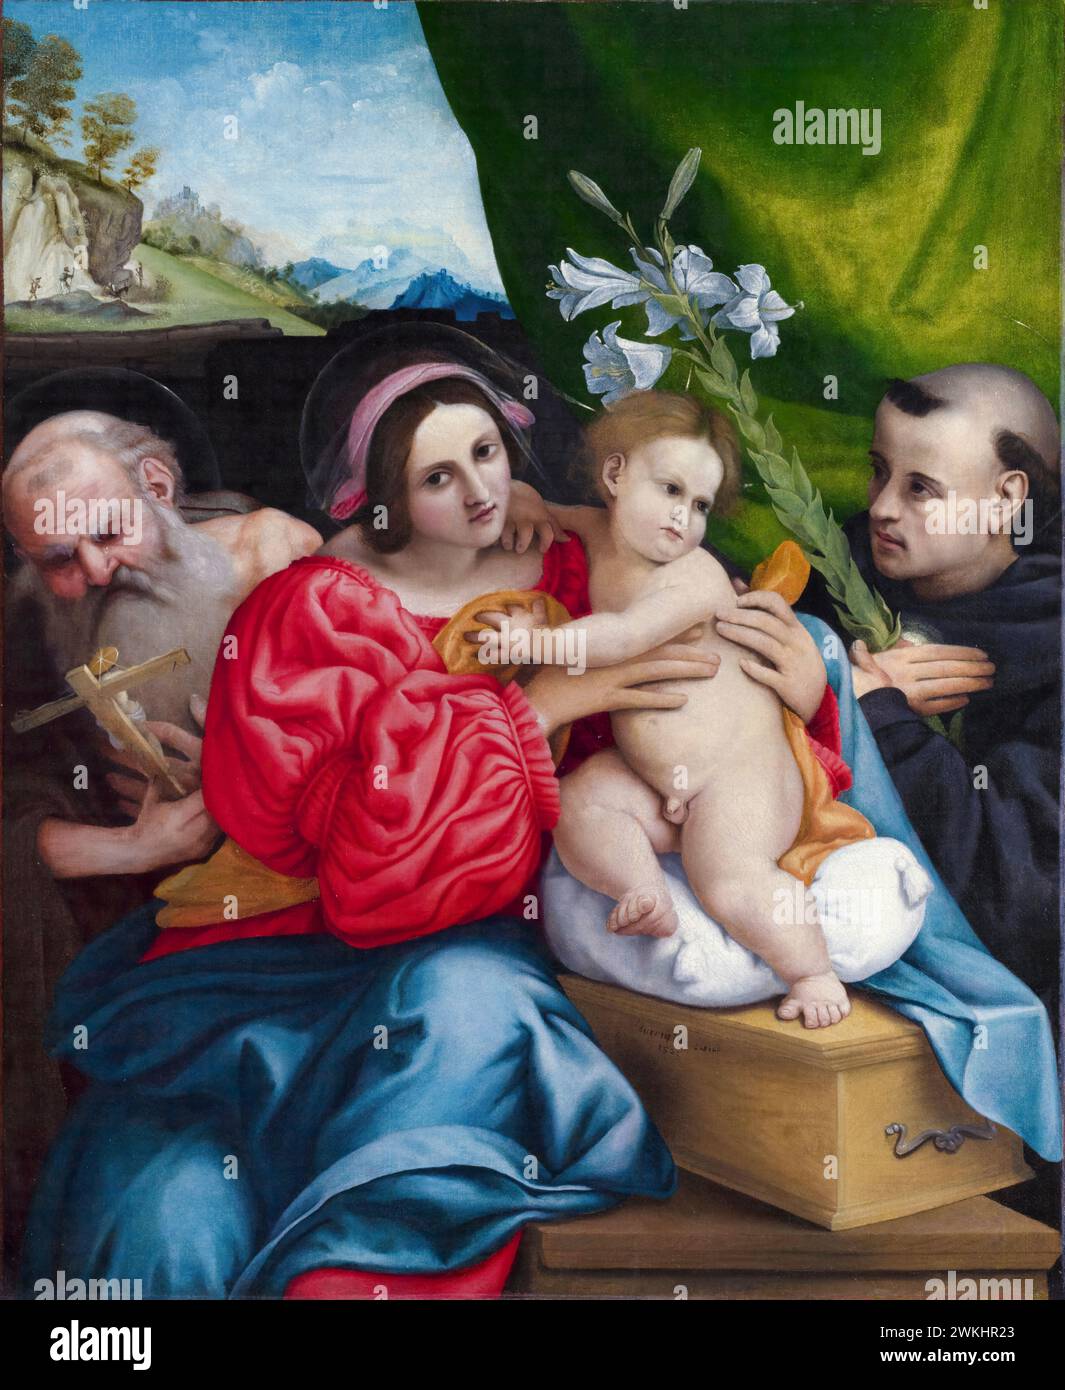 Lorenzo Lotto, The Virgin and Child with Saints Jerome and Nicholas of Tolentino, painting in oil on canvas, 1522 Stock Photo